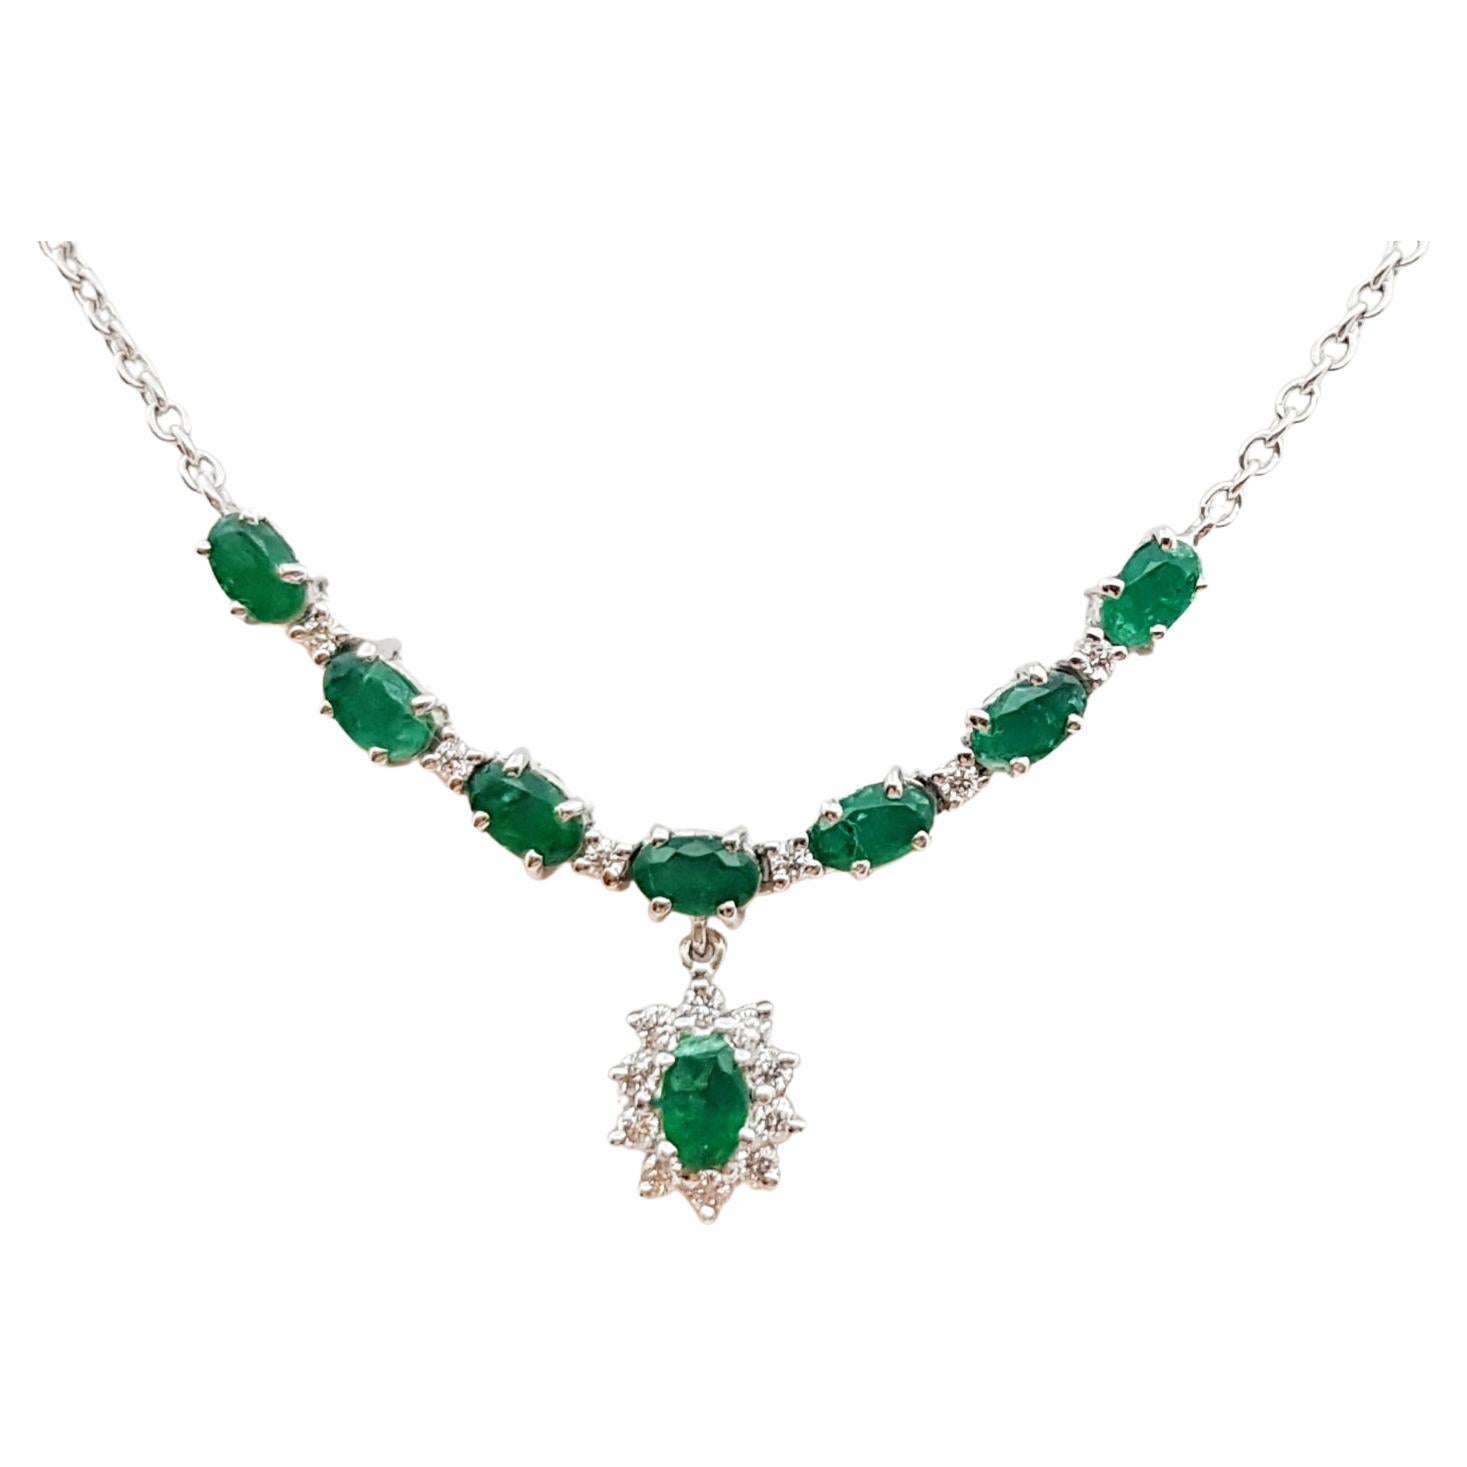 Emerald with Diamond Necklace Set in 18 Karat White Gold Settings